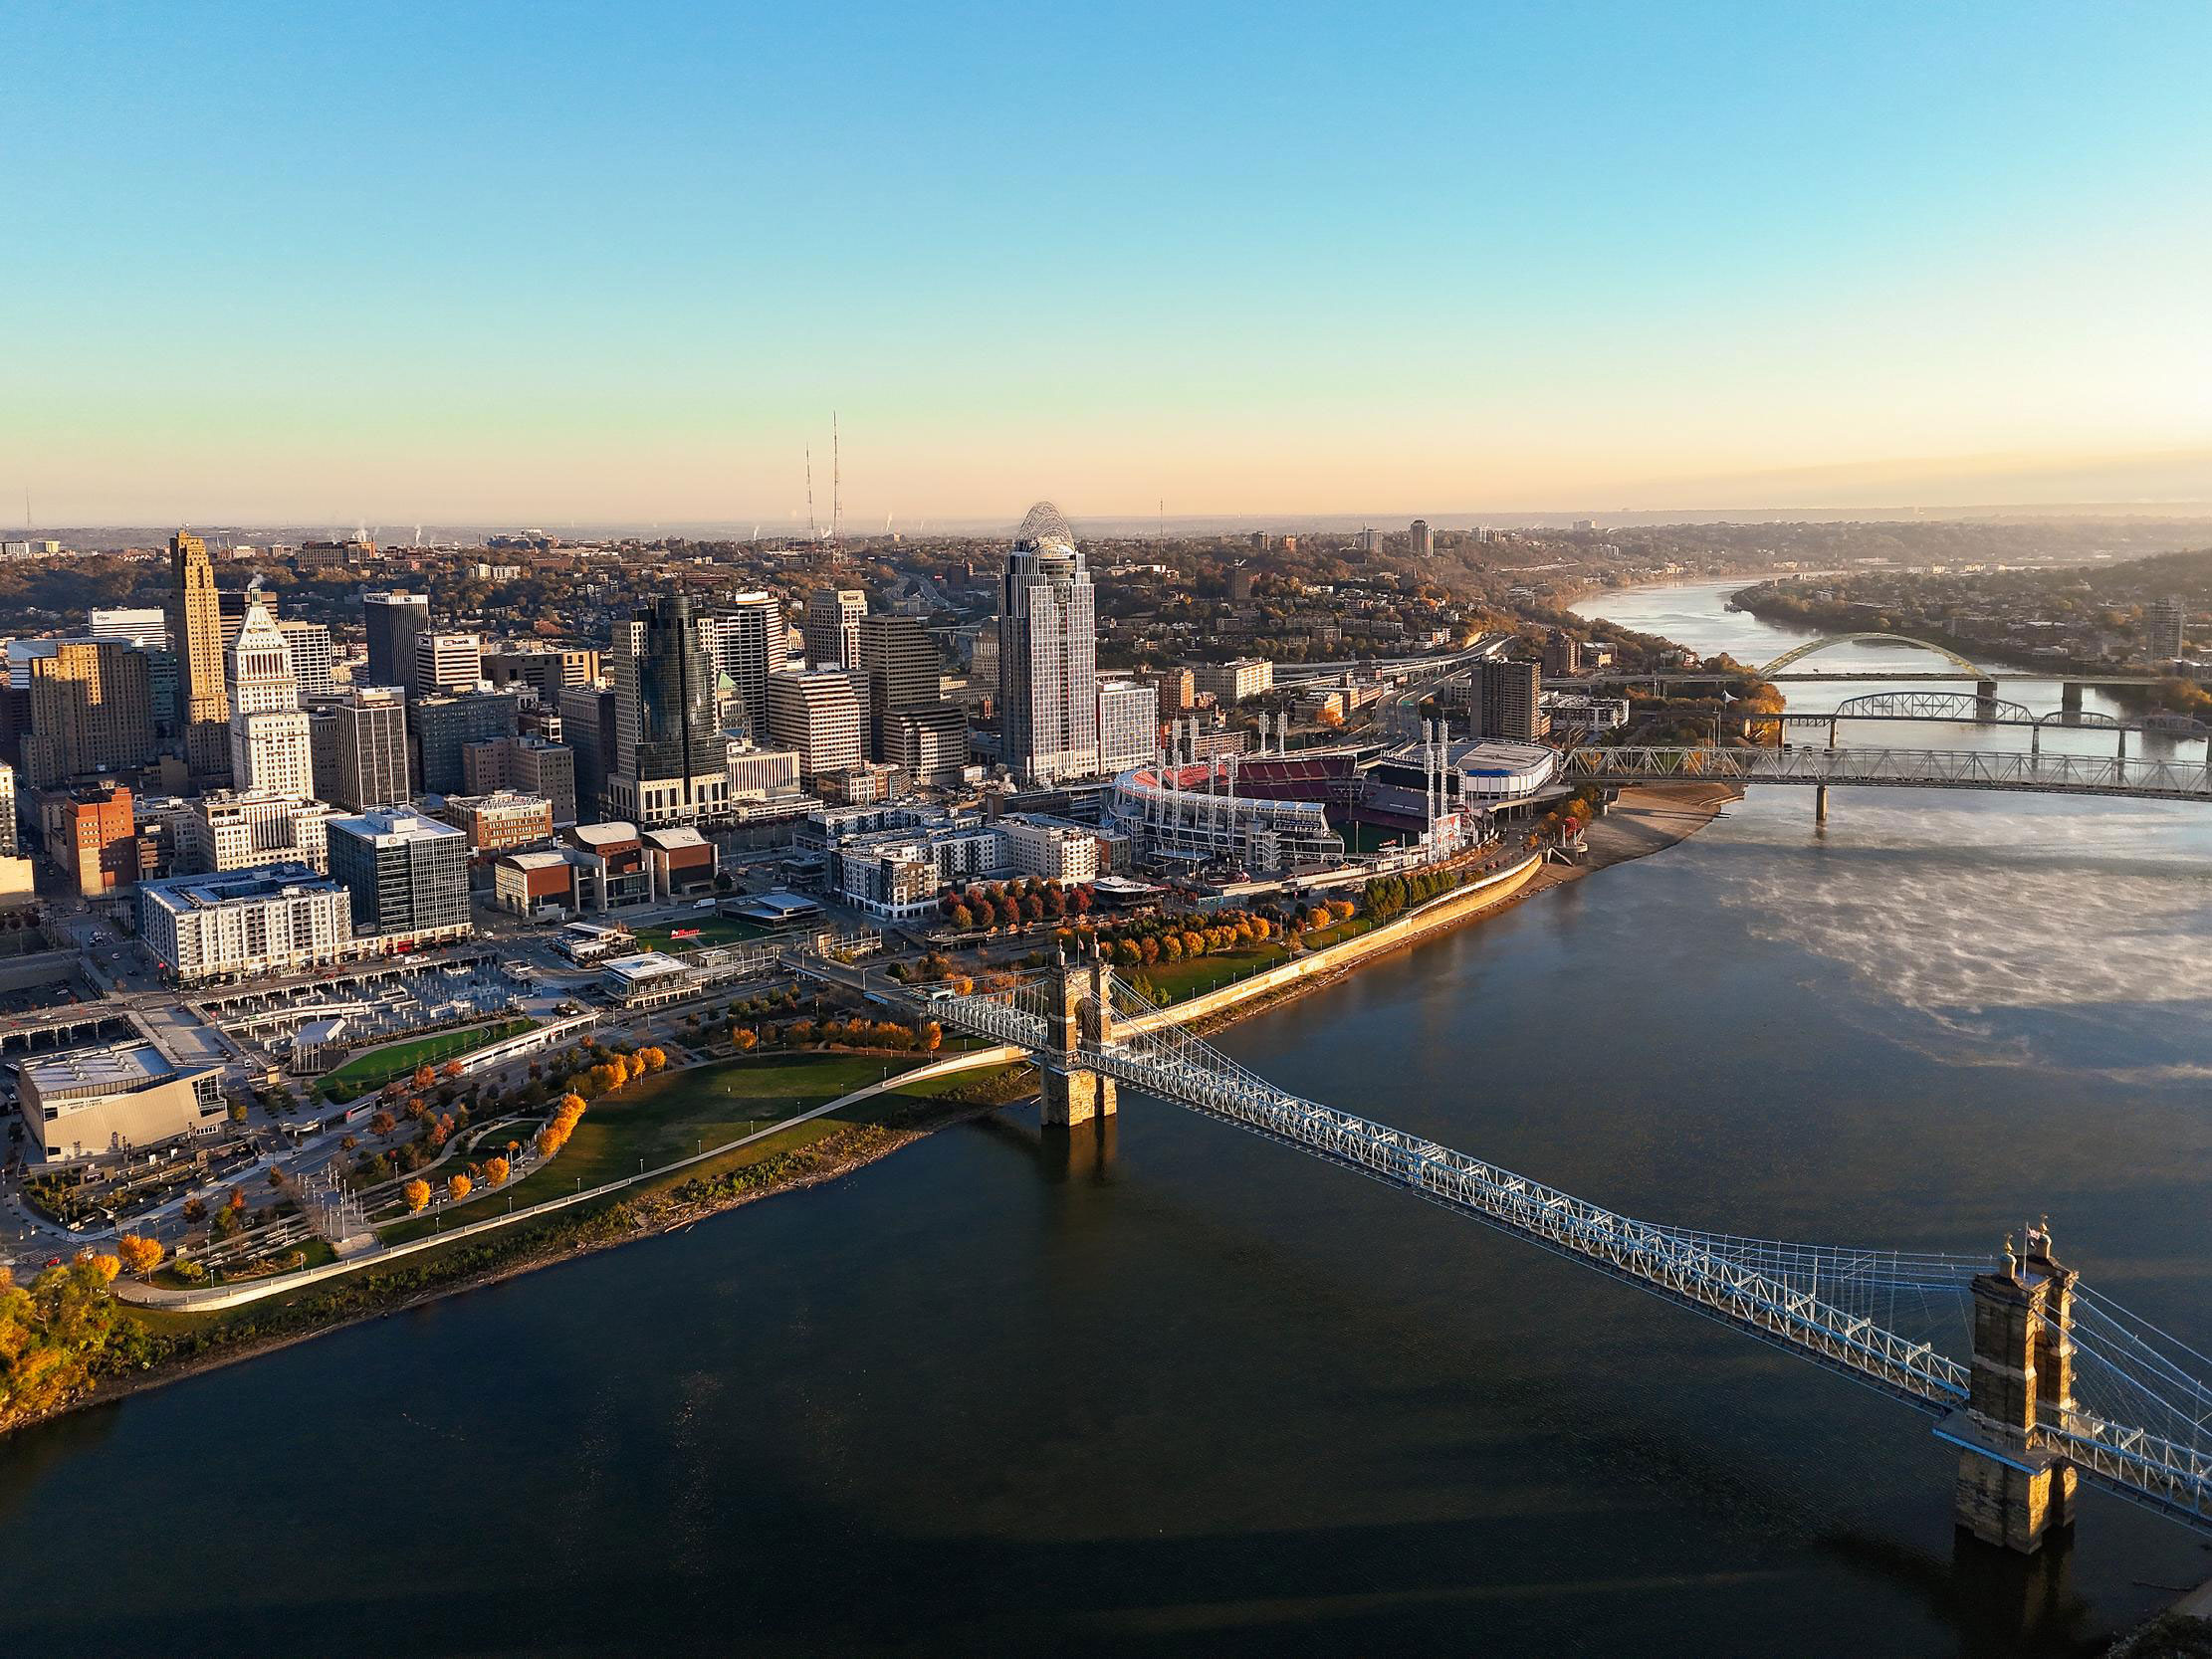 An aerial view of Cincinnati's skyline and the Ohio River